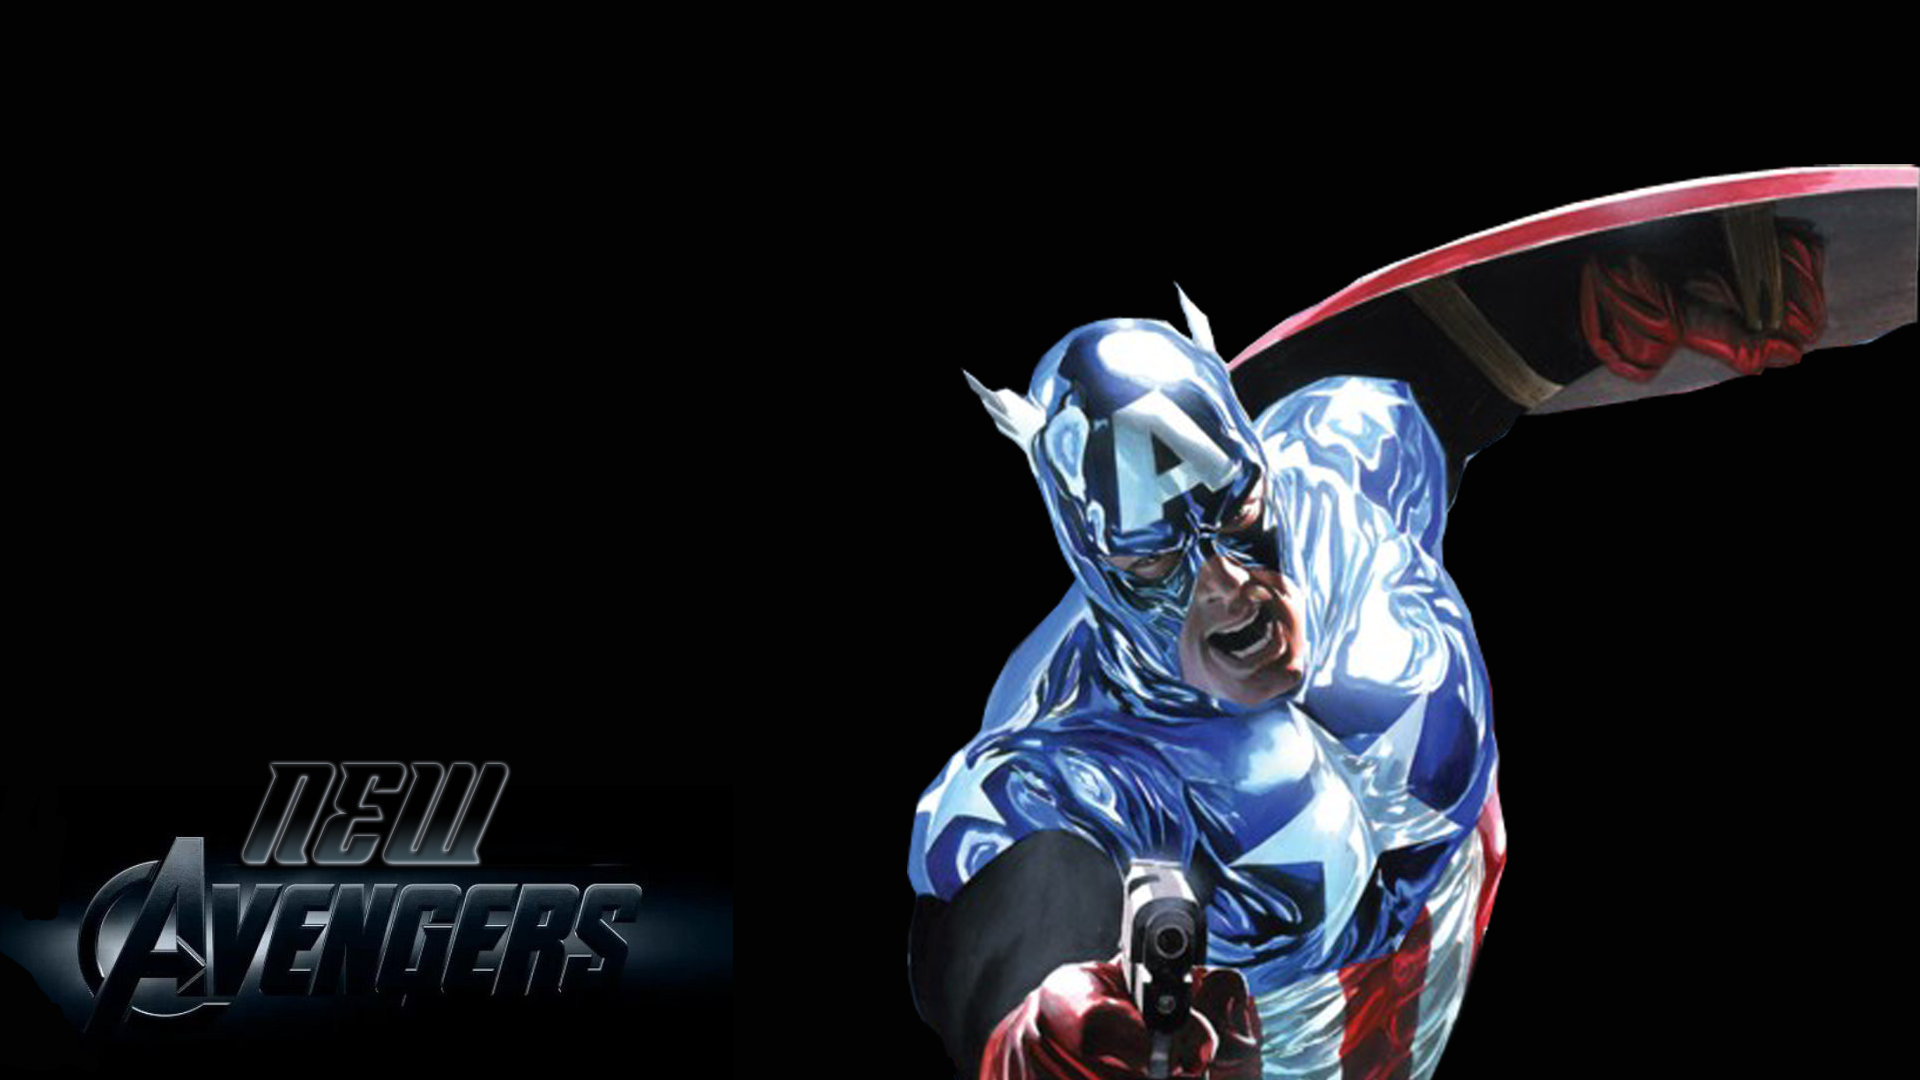 Download New Avengers Captain America Poster Wallpaper Free By ...